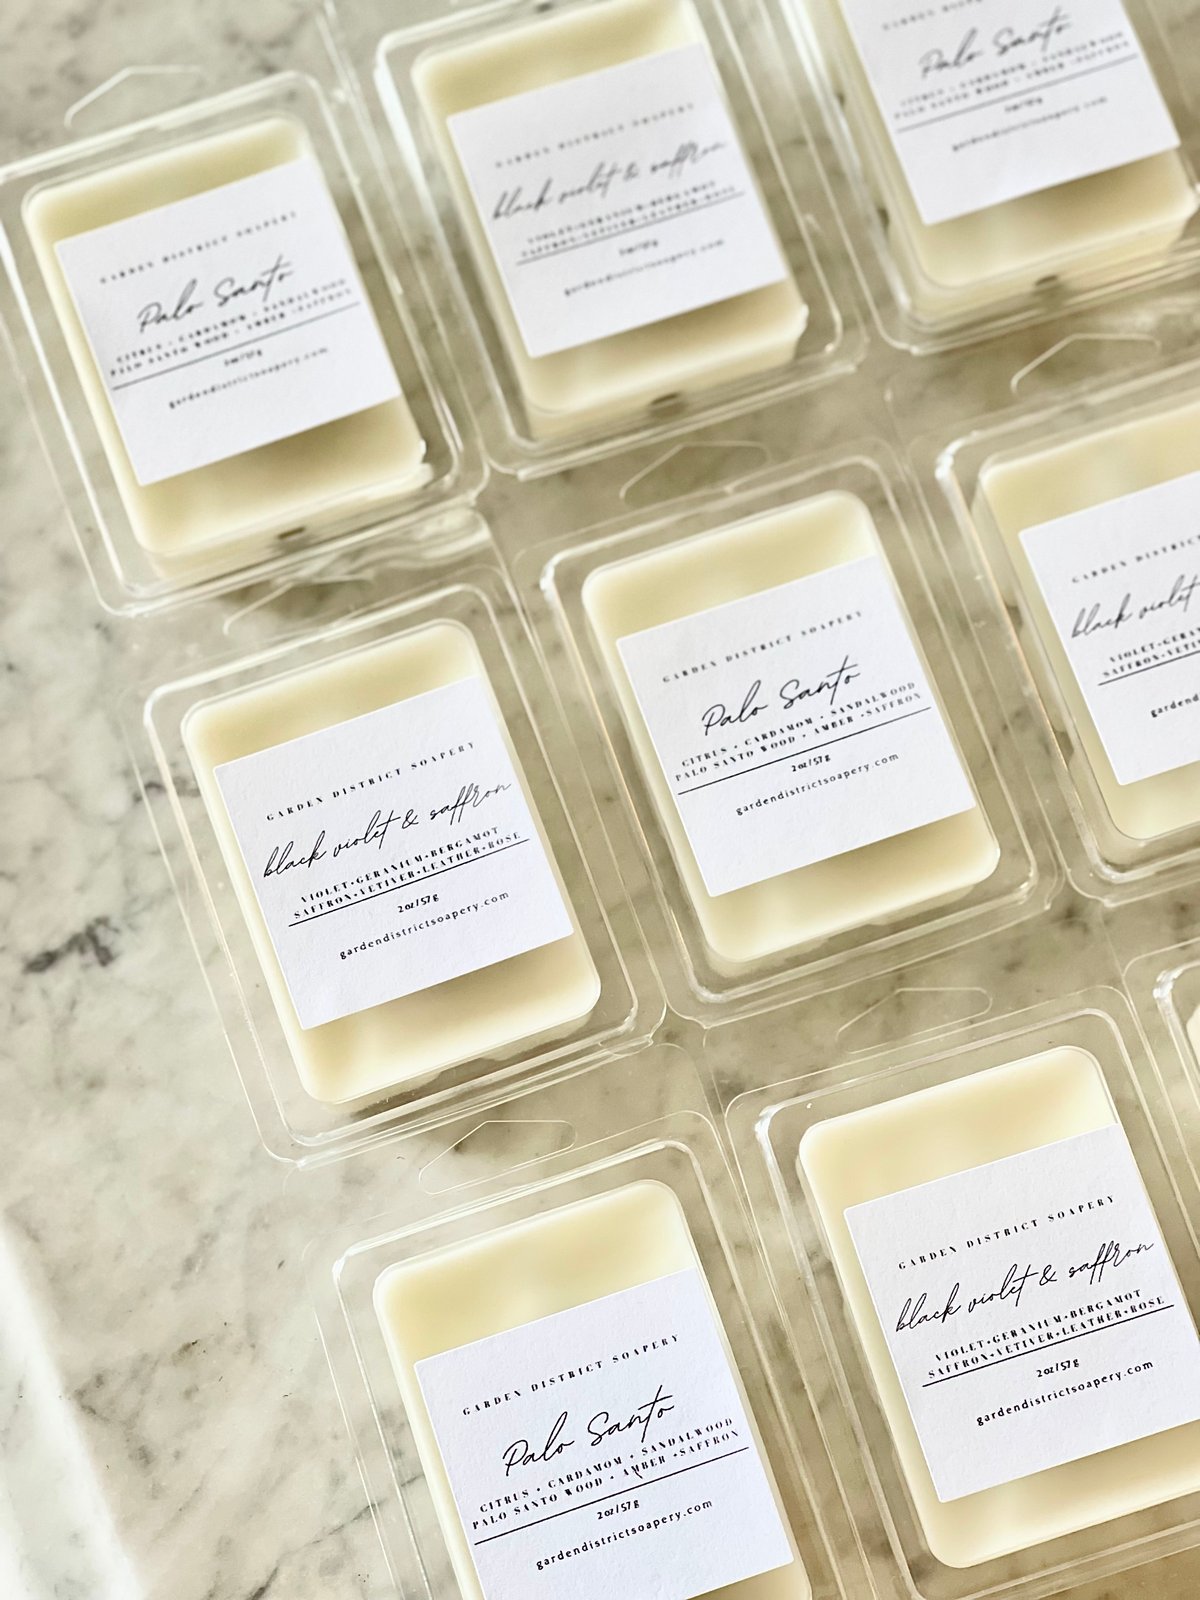  Intensely Fragrant Wax Melts 